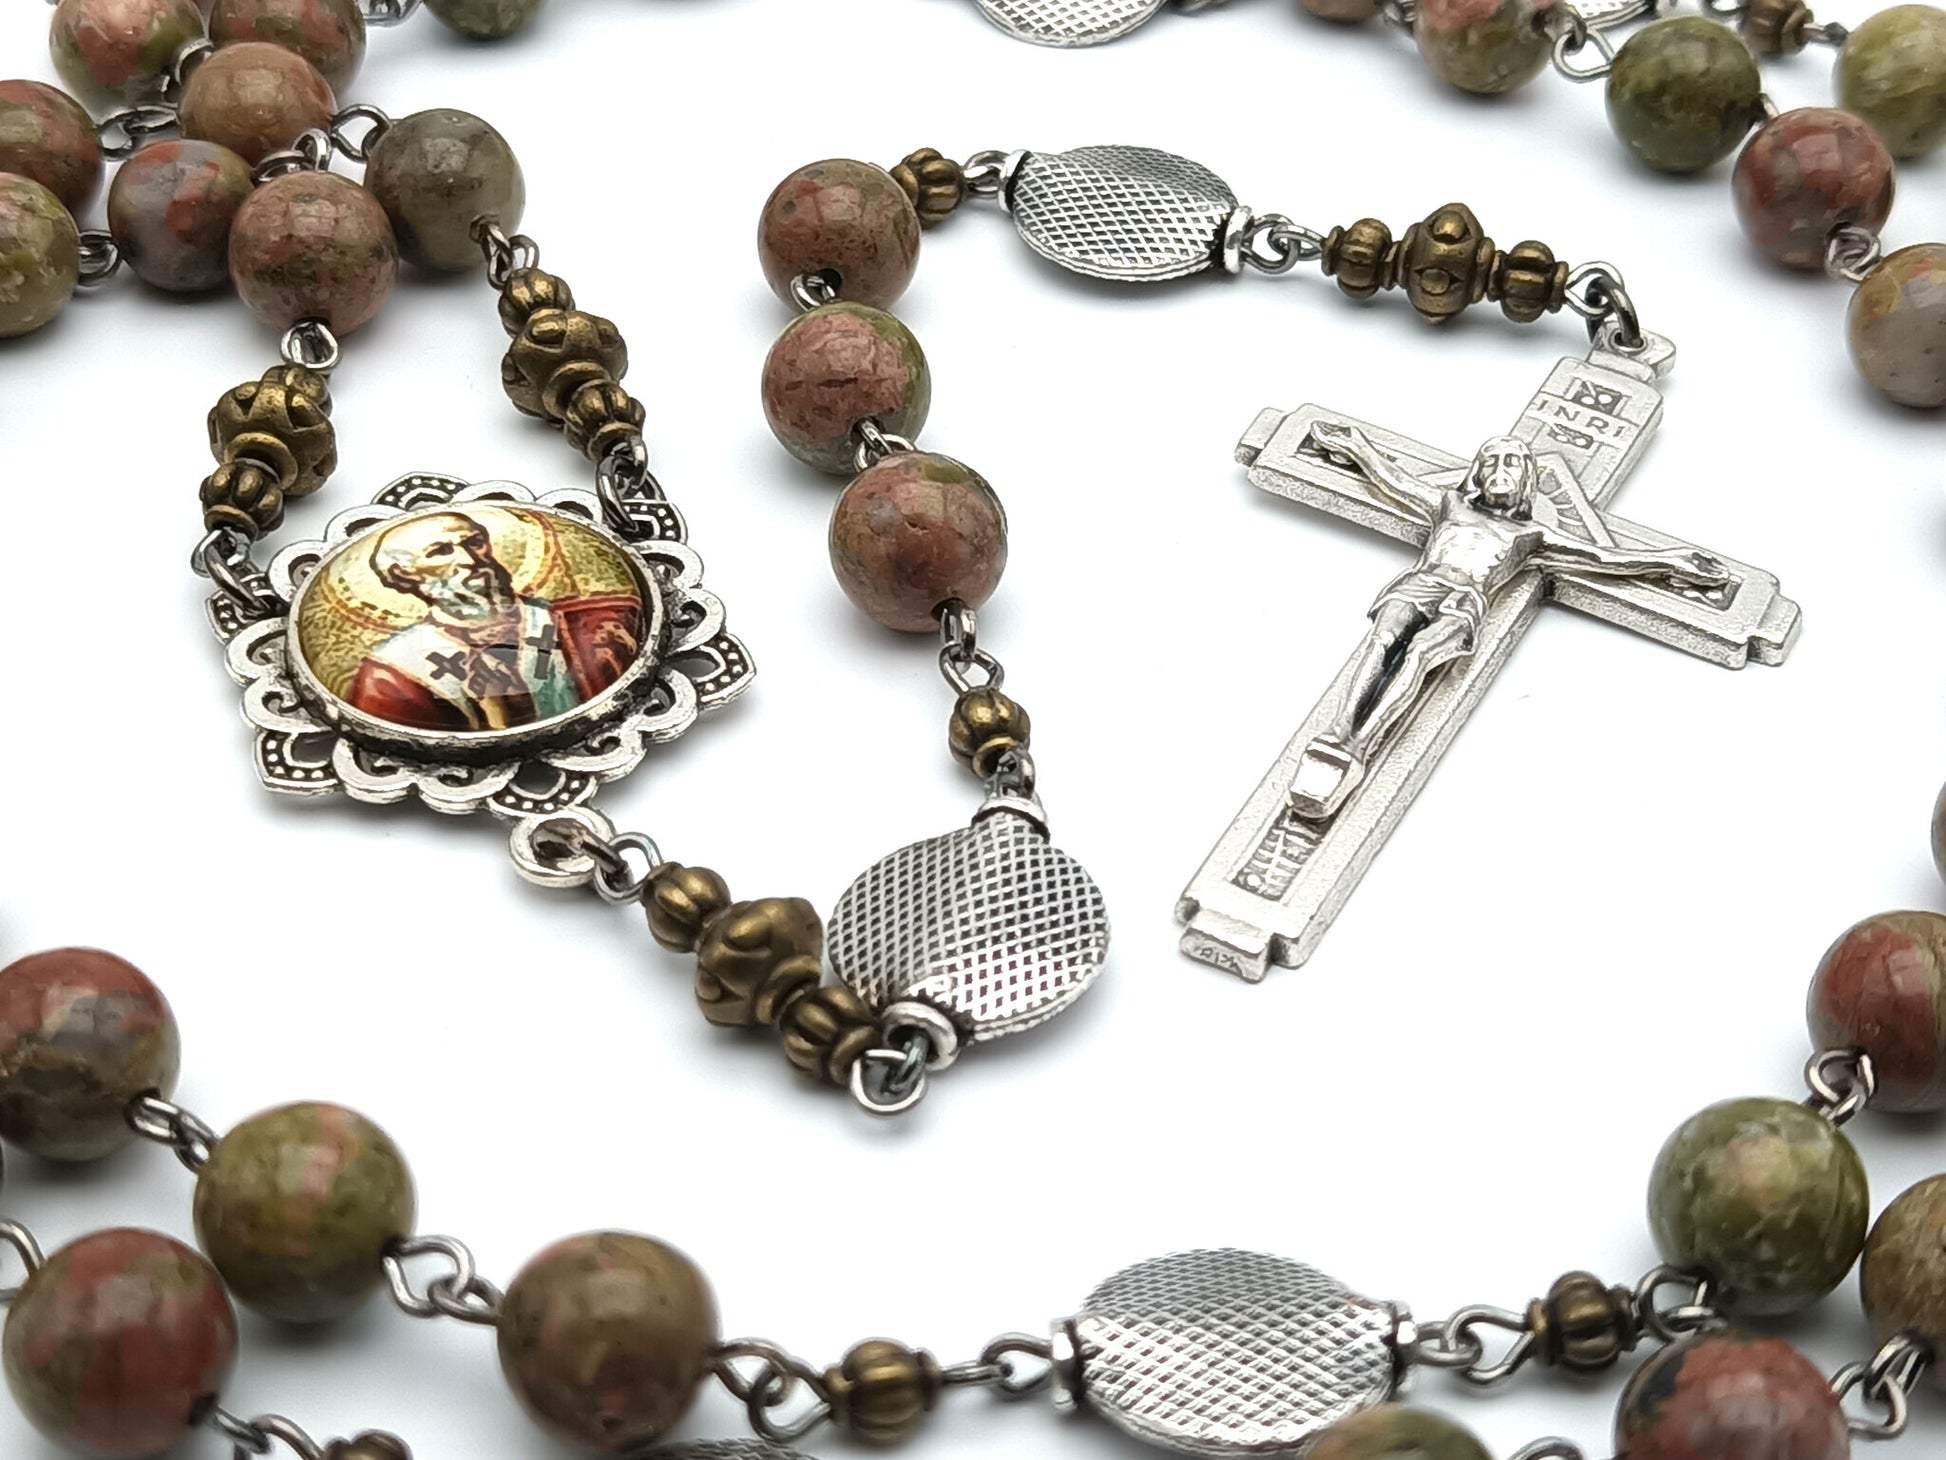 Saint Athanasius unique rosary beads with gemstone beads, silver crucifix, pater beads and picture centre medal.